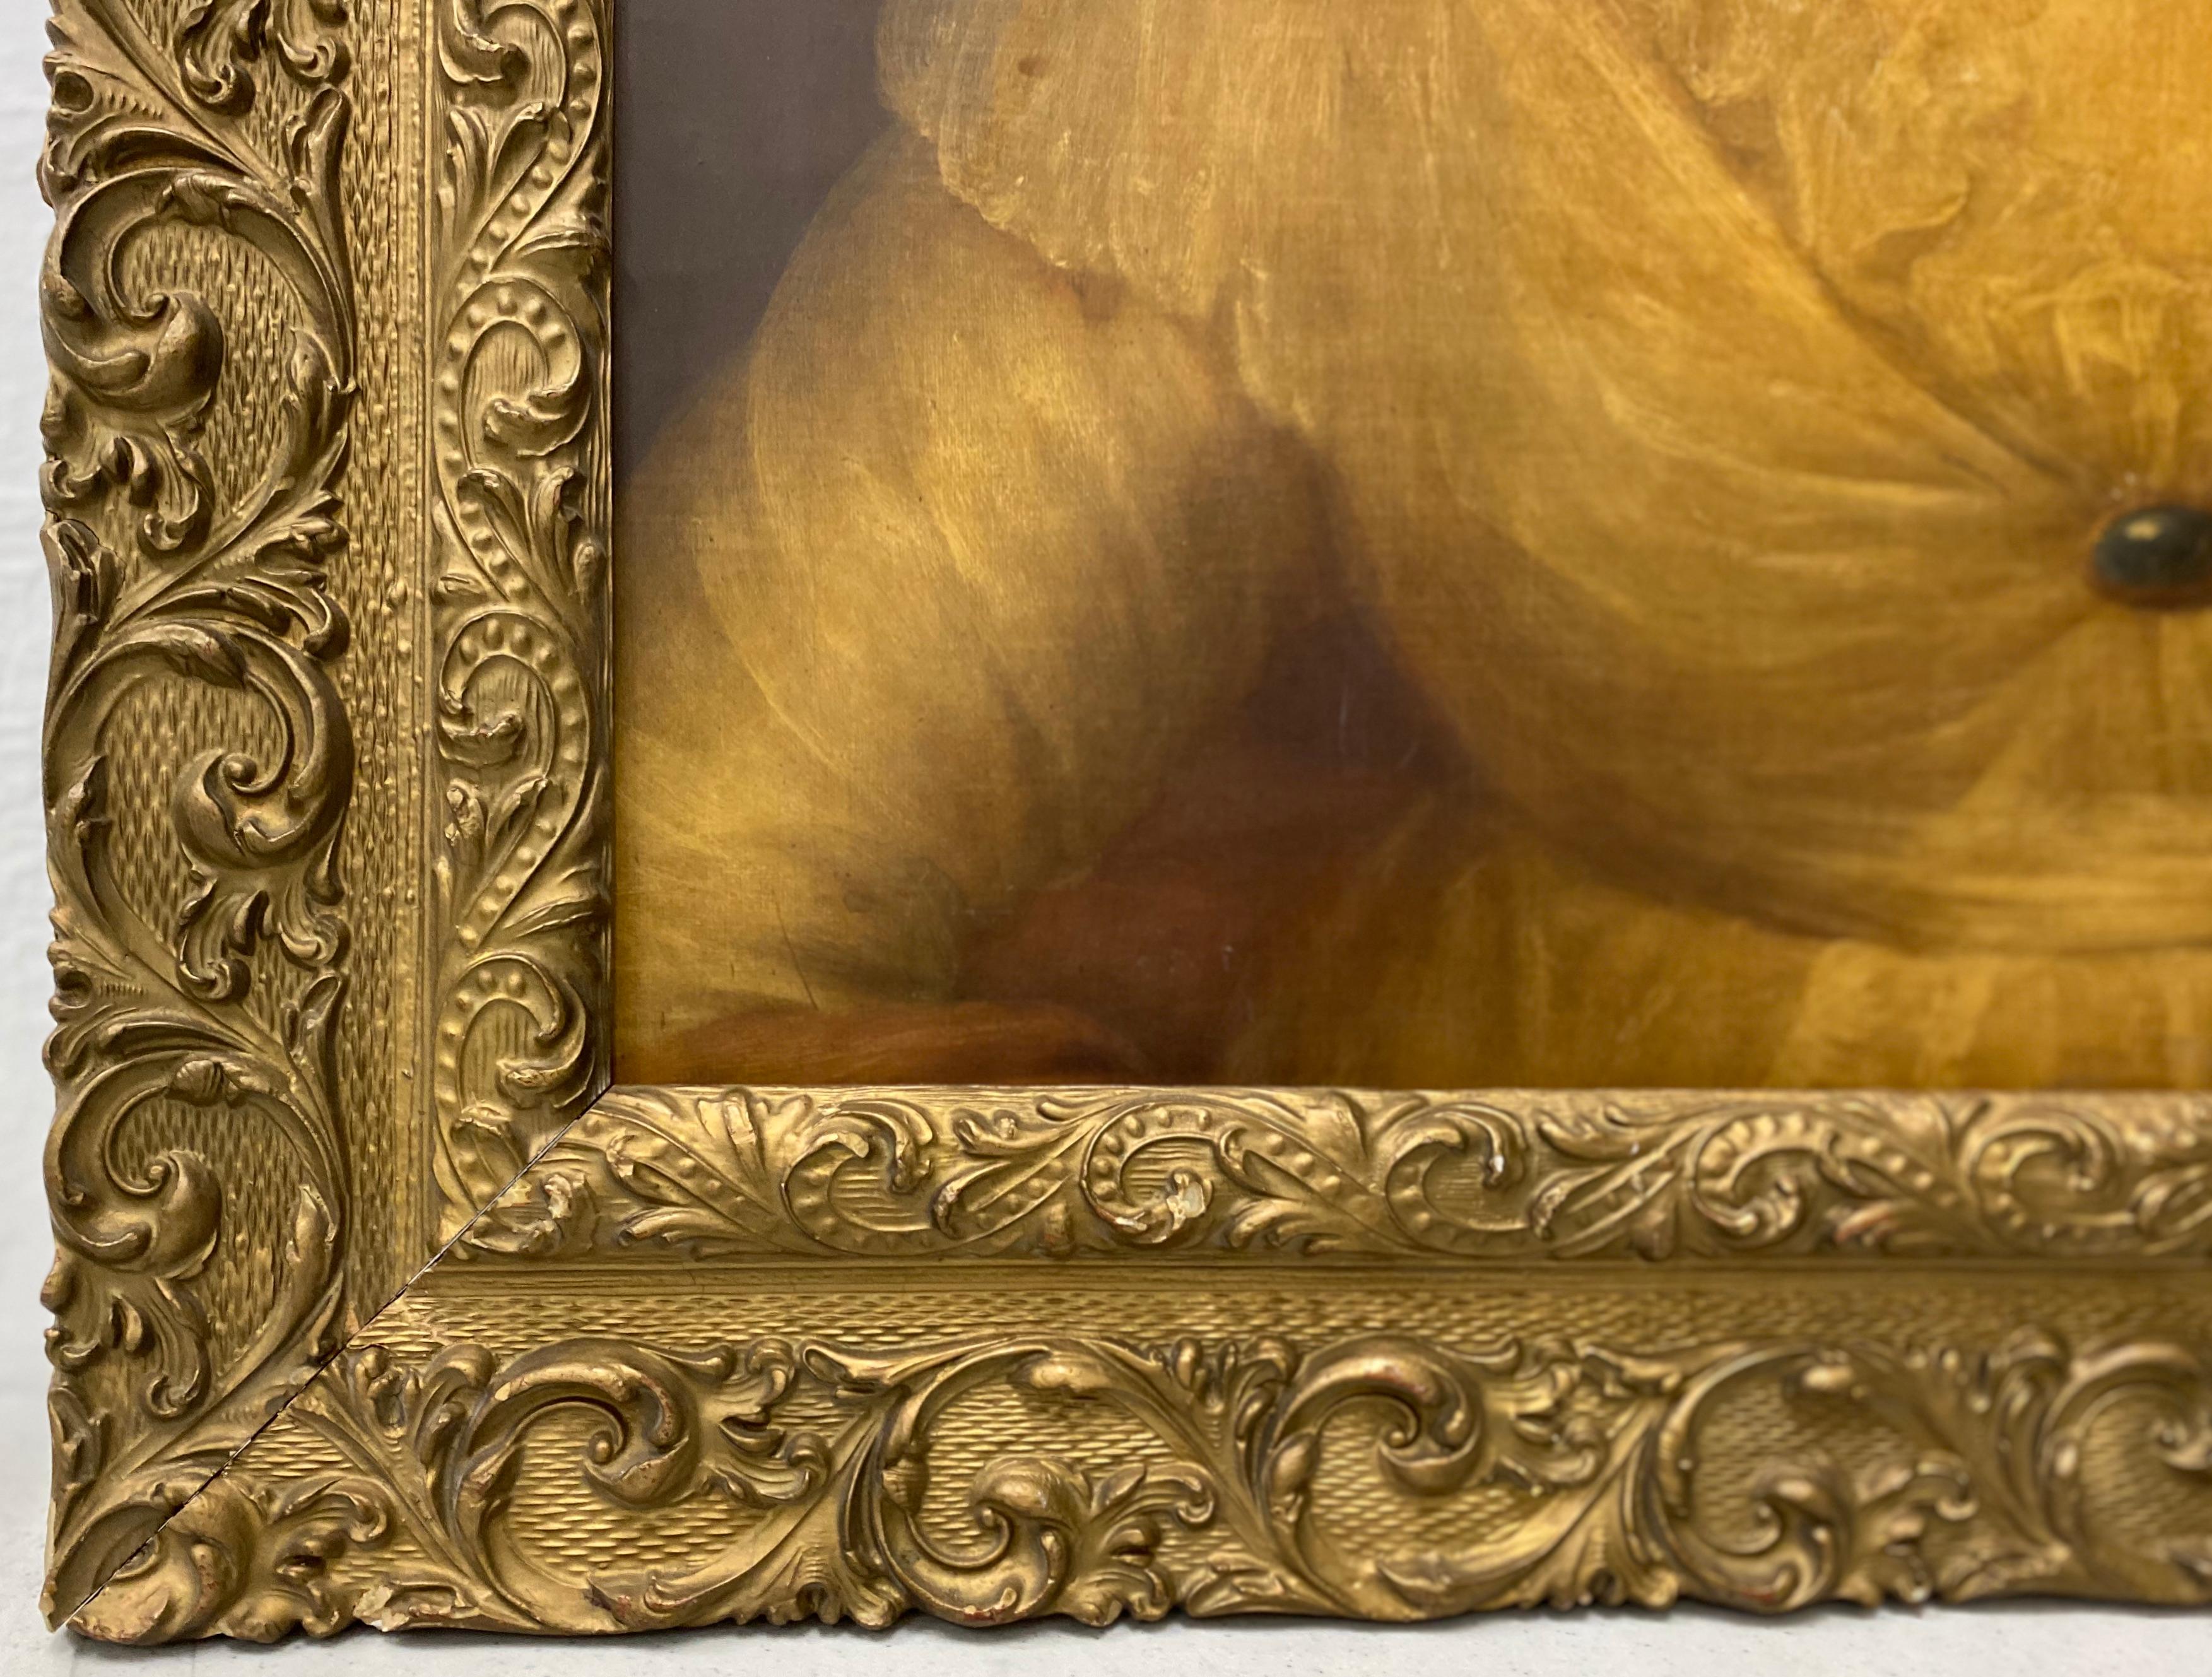 18th to 19th Century Woman in Yellow Original Oil Portrait c.1800

Original oil on linen over board

The frame is not period to the painting, but still looks good

Oil painting dimensions 21.5